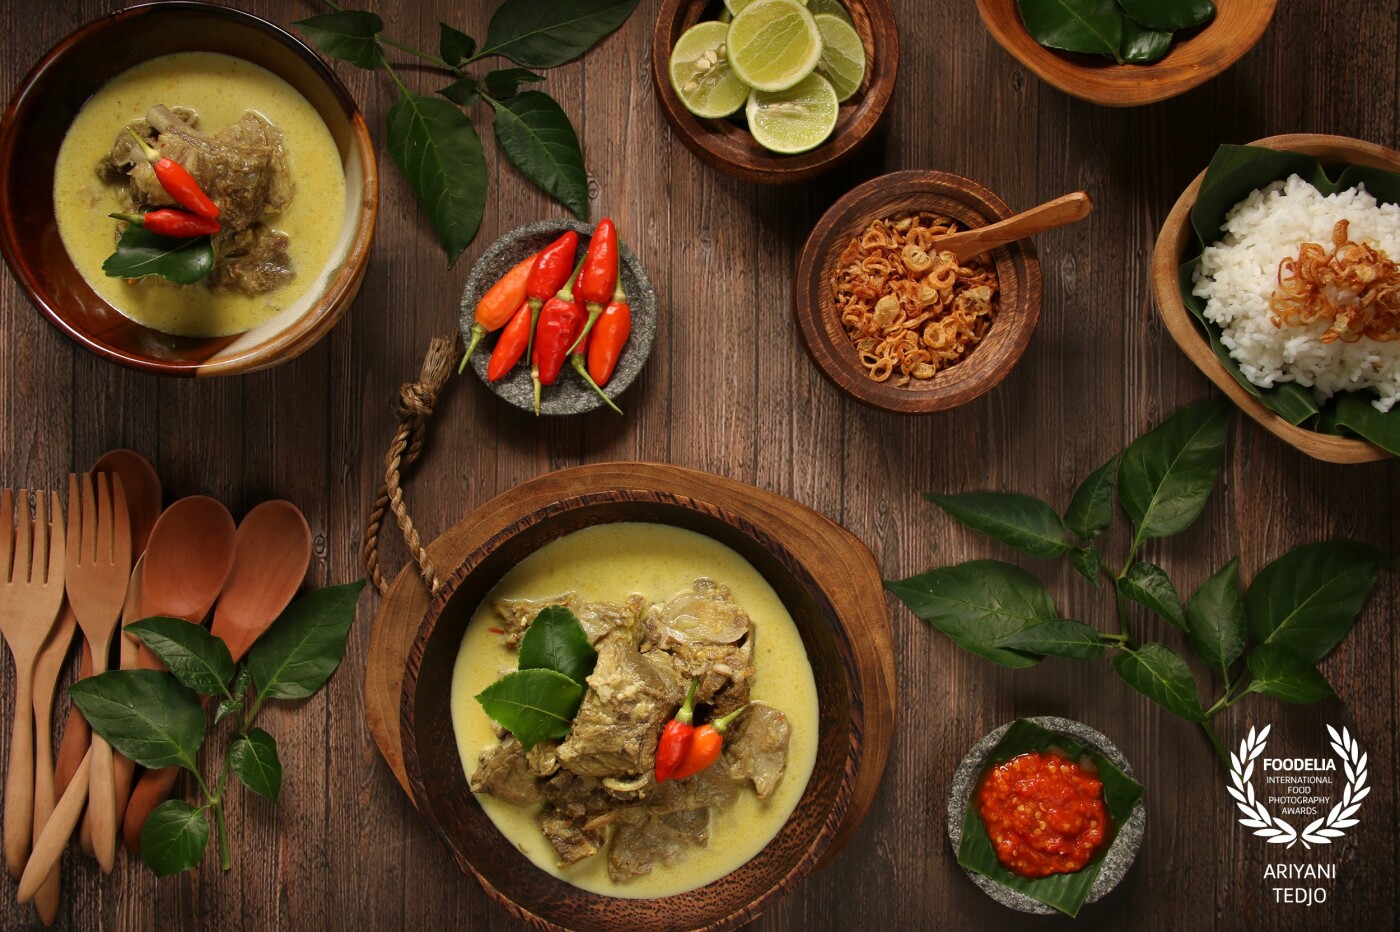 Traditional Javanese mutton curry soup, or locally known as Gulai Kambing. Chunks of mutton and the ribs, cooked in spice-rich coconut milk. Must be served while hot; and for those who want extra heat in the meal can add some red chili paste. The soup is commonly accompanied with steamed rice.